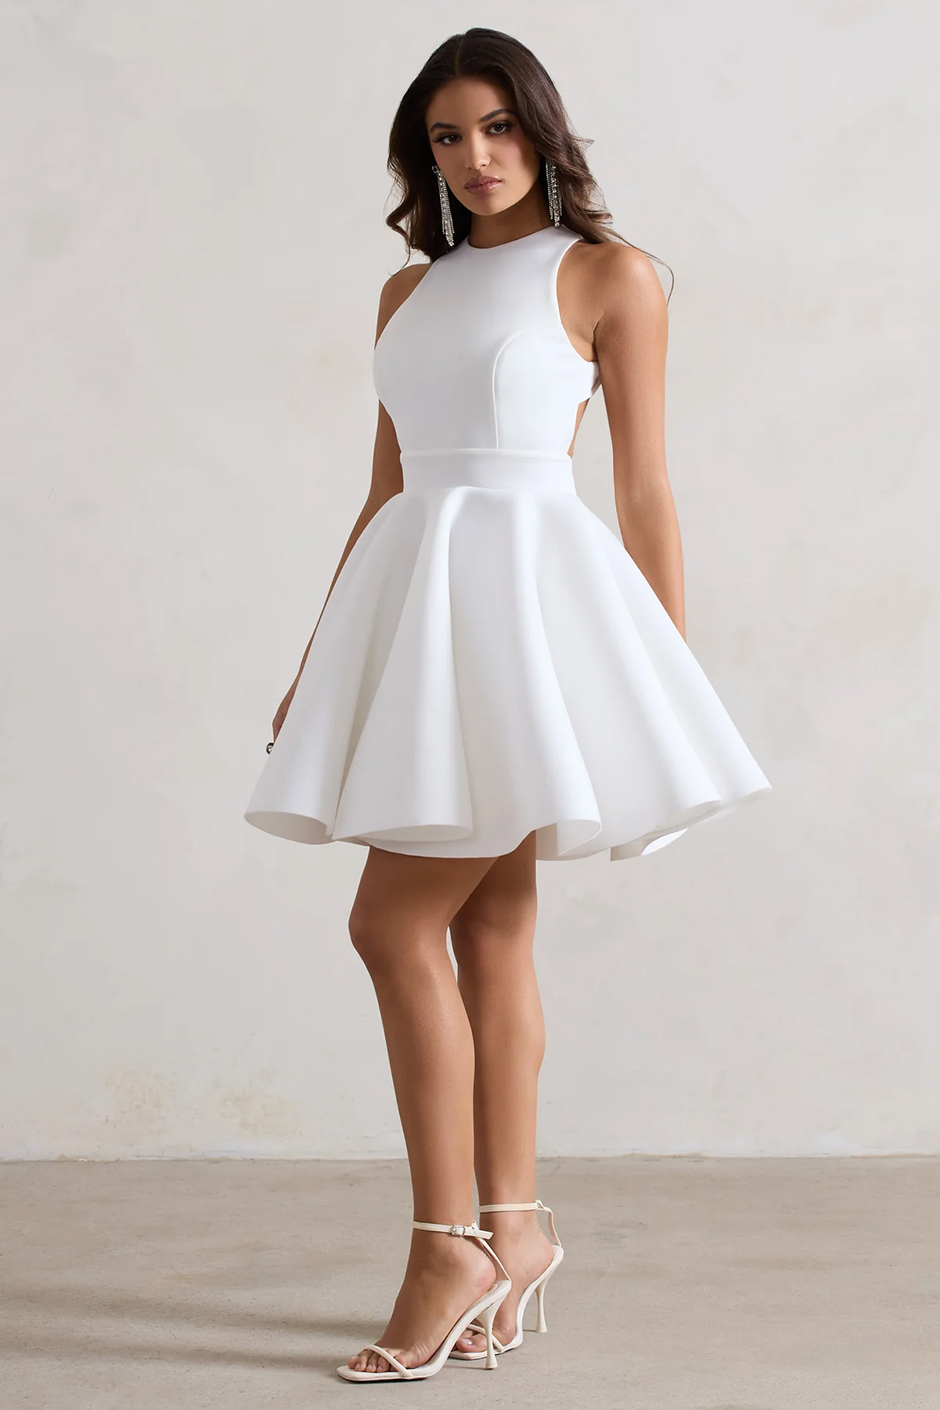 White mini dress with racer neckline and backless design from Club L London